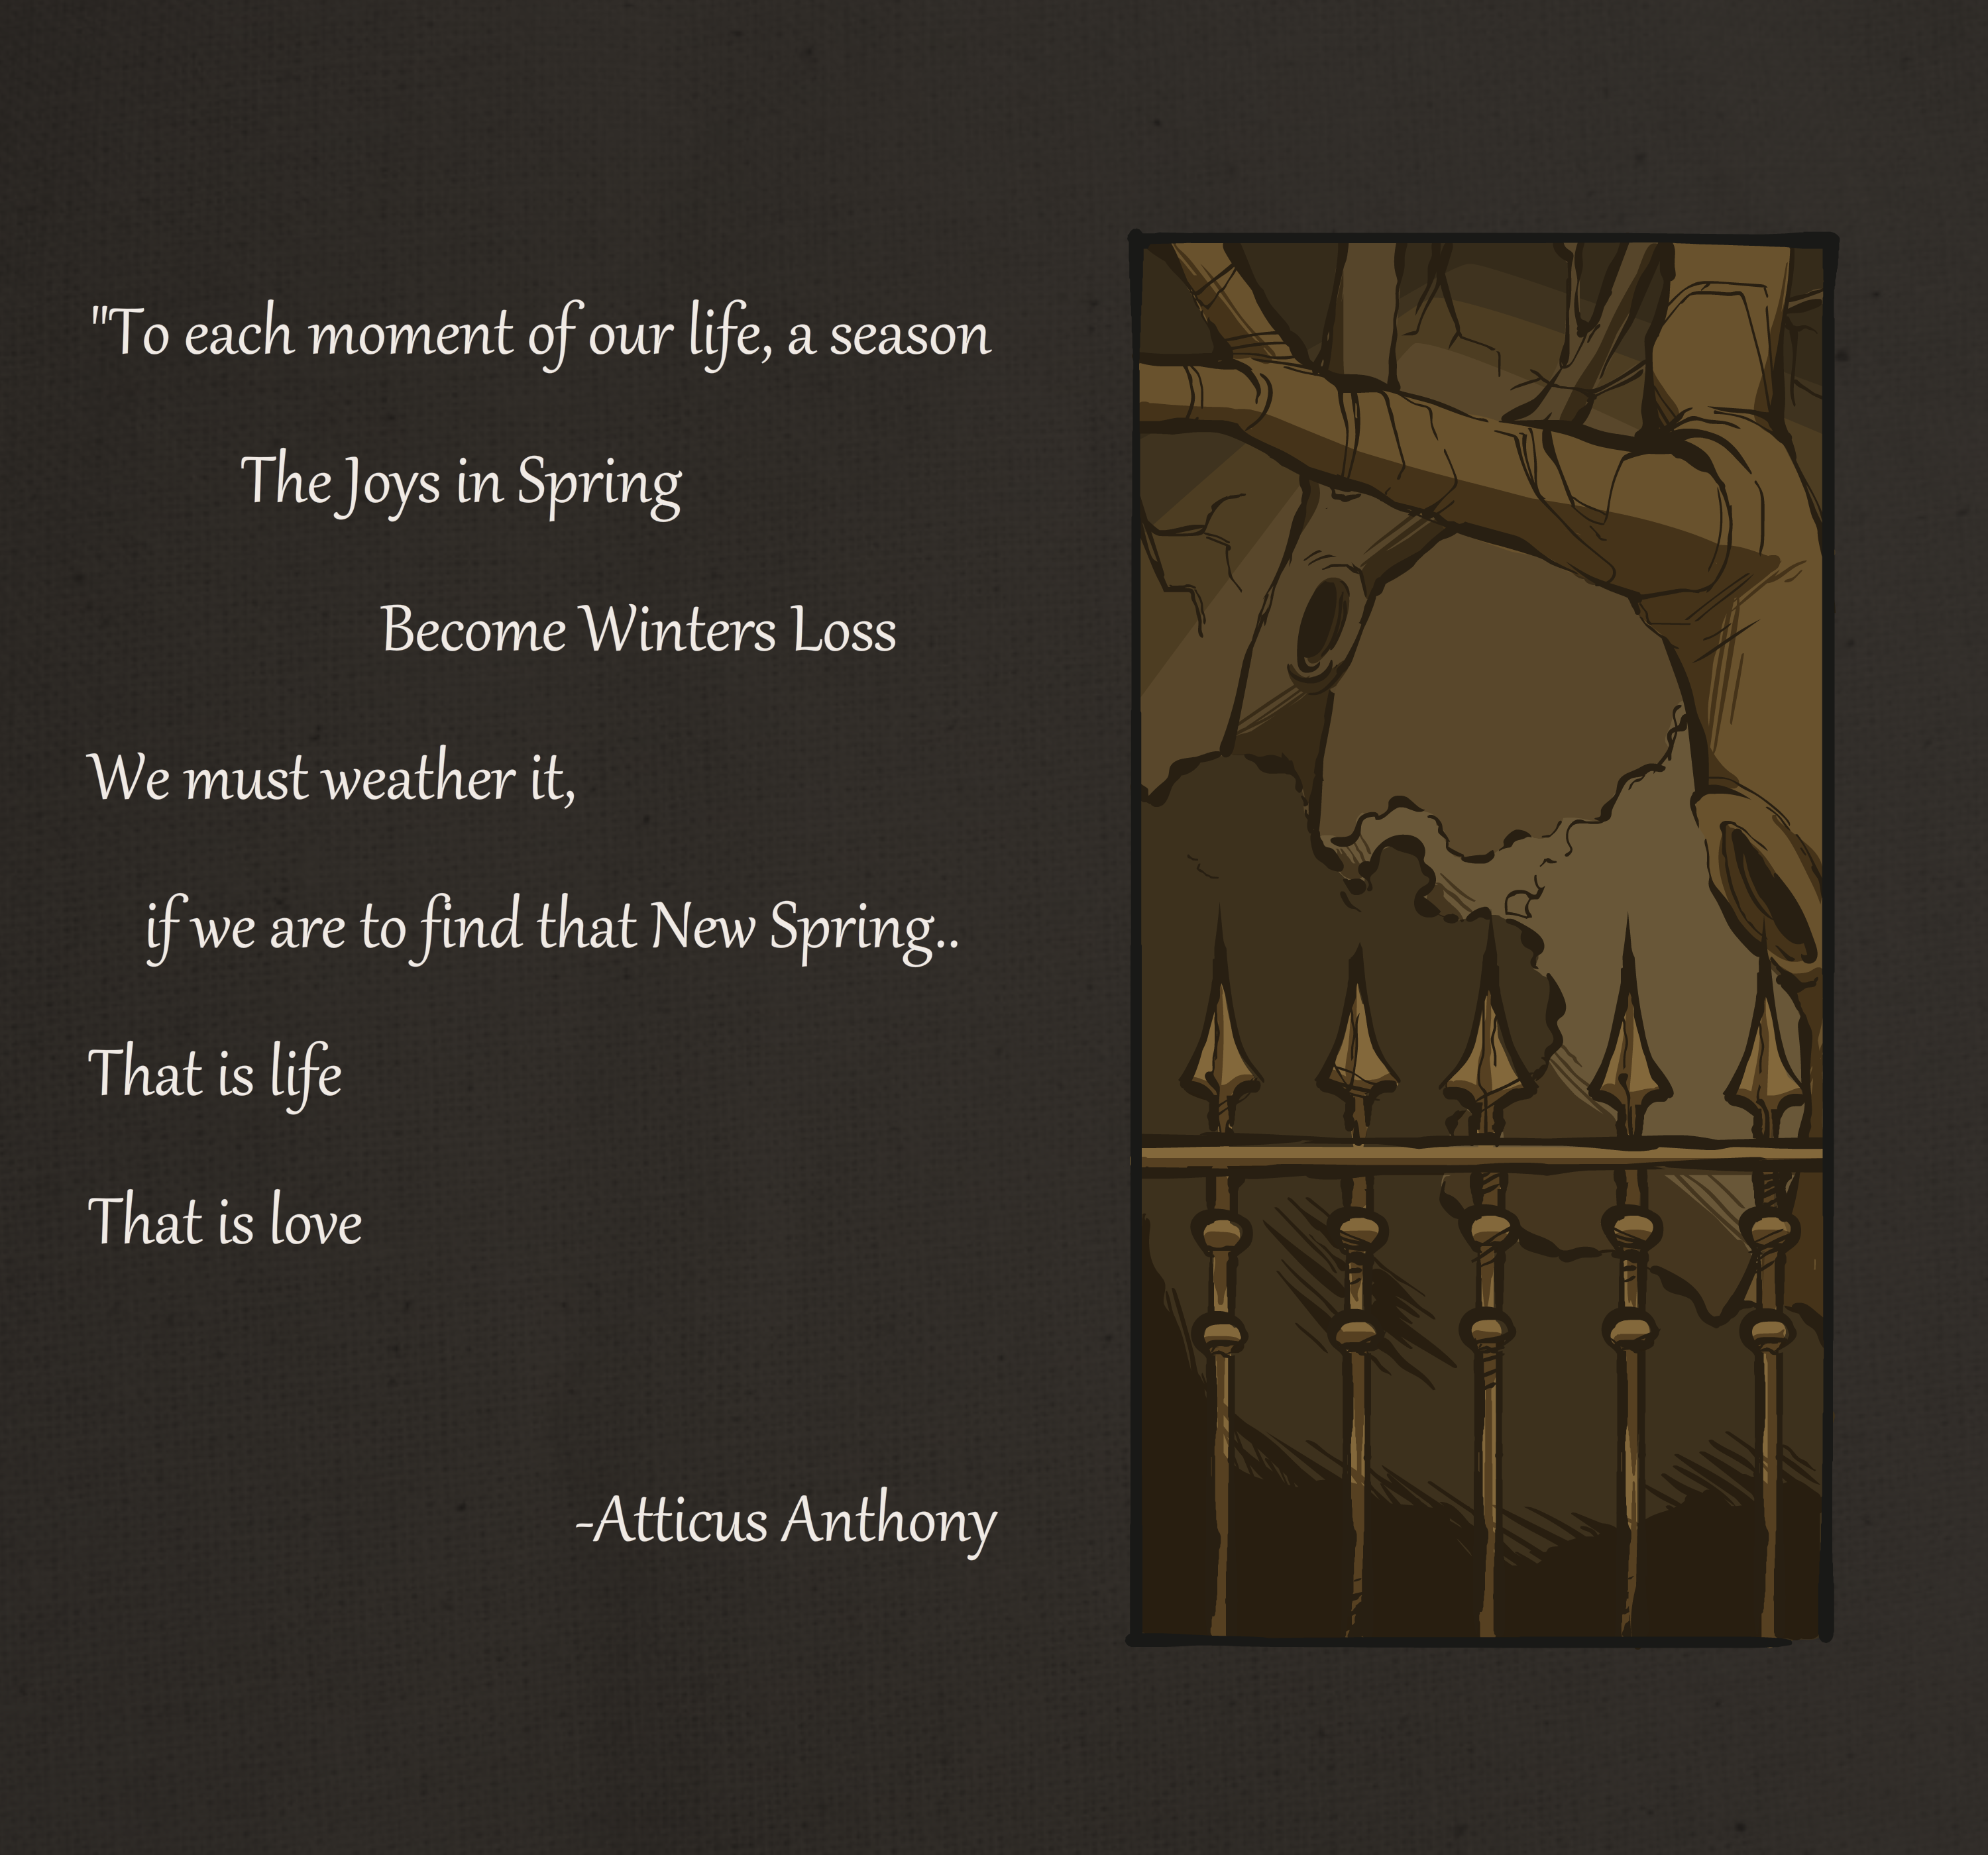 Quote on the left. “To each moment of our life, a season The Joys in Spring Become Winters Loss We must weather it, if we are to find that New Spring.. That is life That is love -Atticus Anthony. Image on the right of a gate with trees in the background.